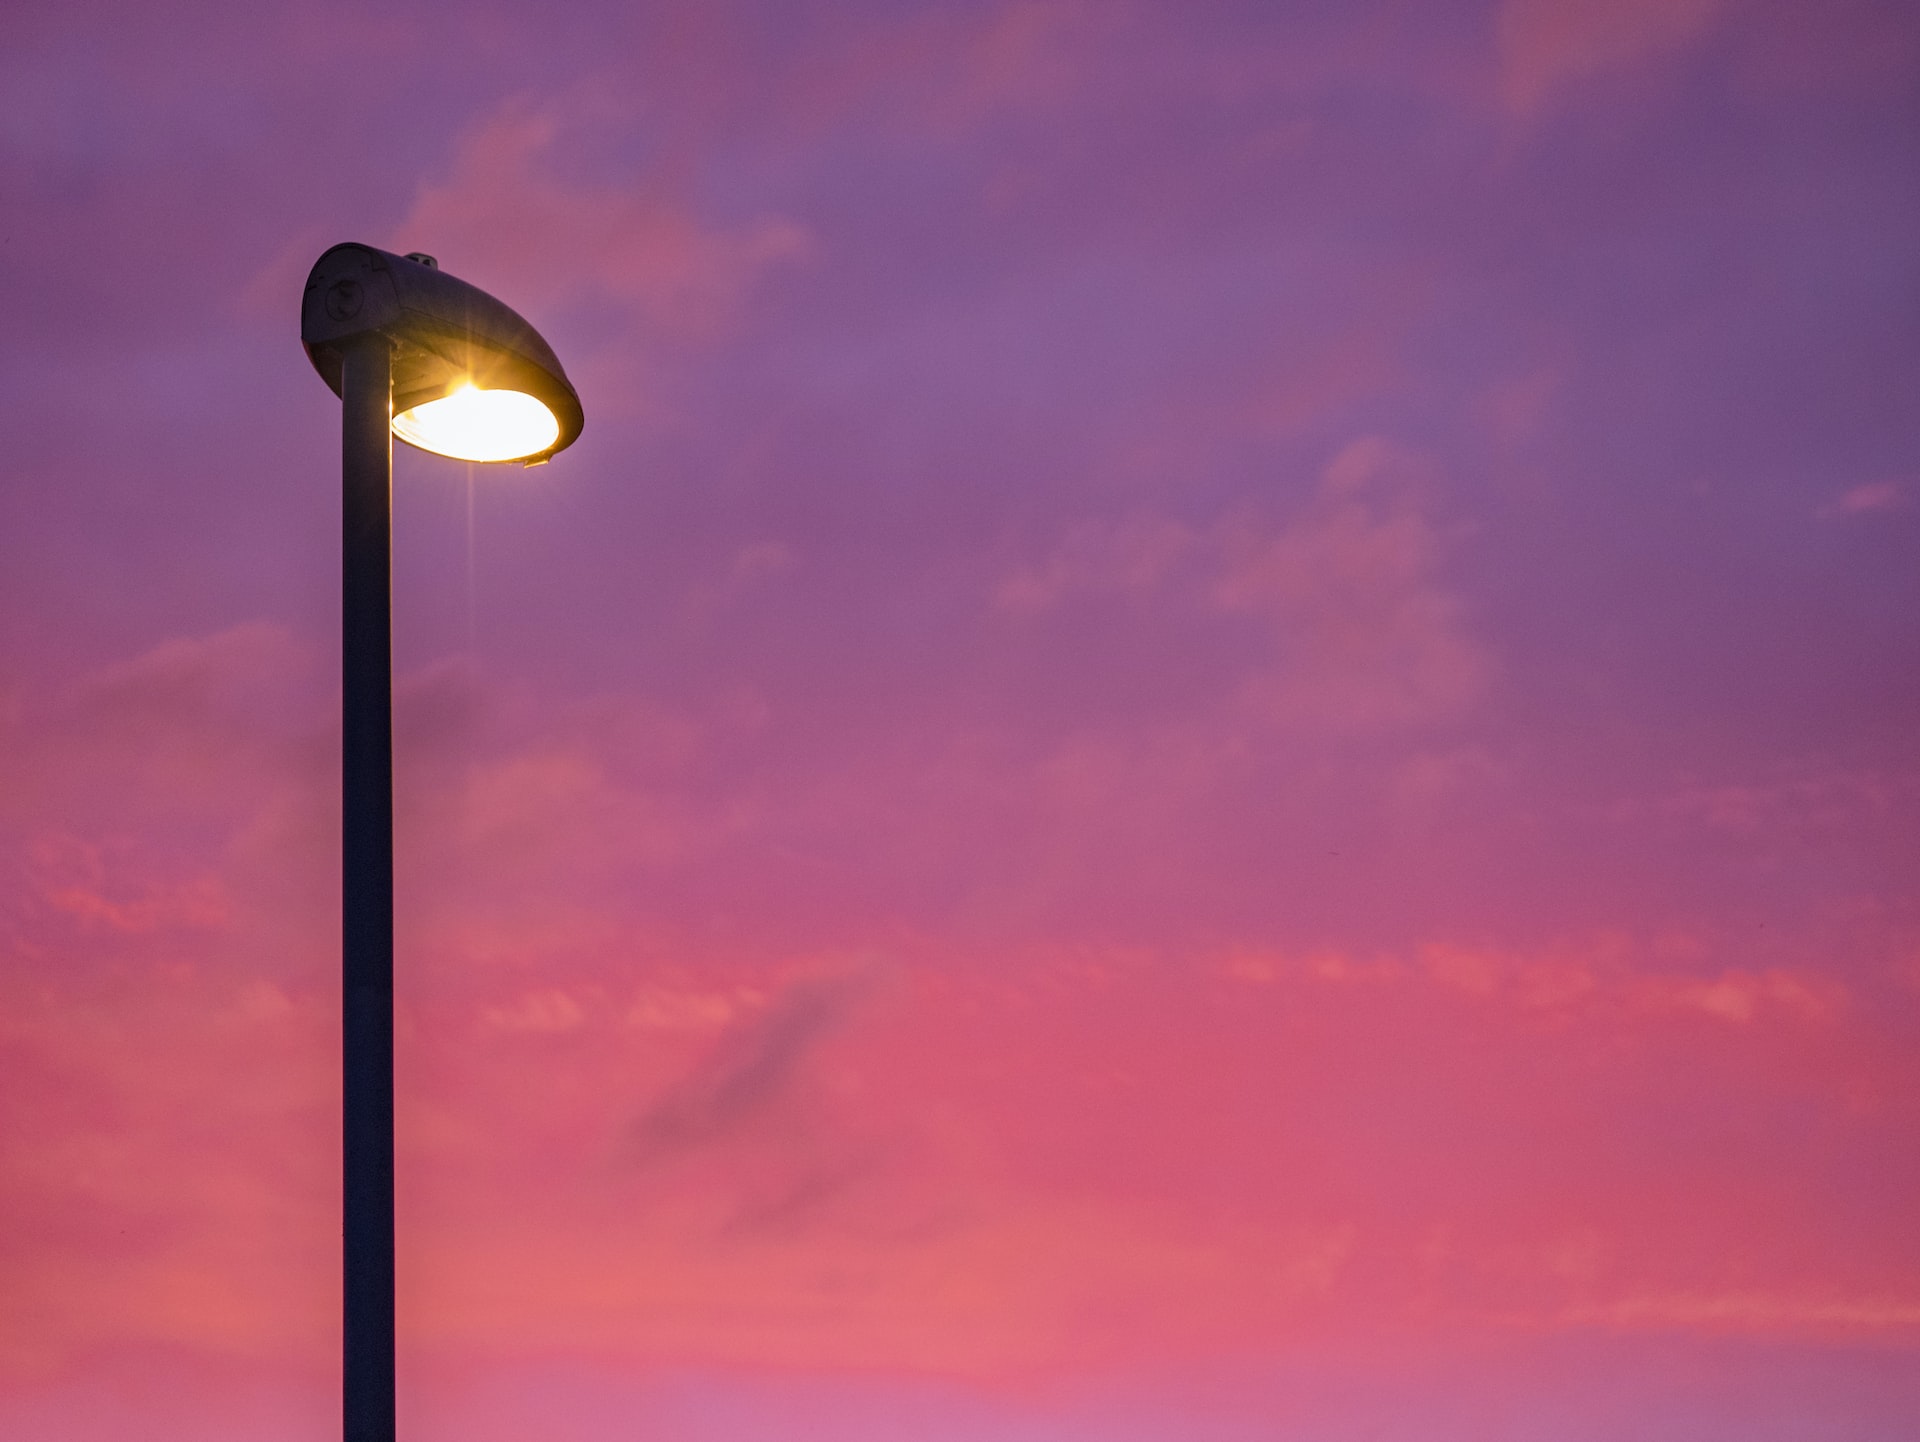 Sunset with lamppost